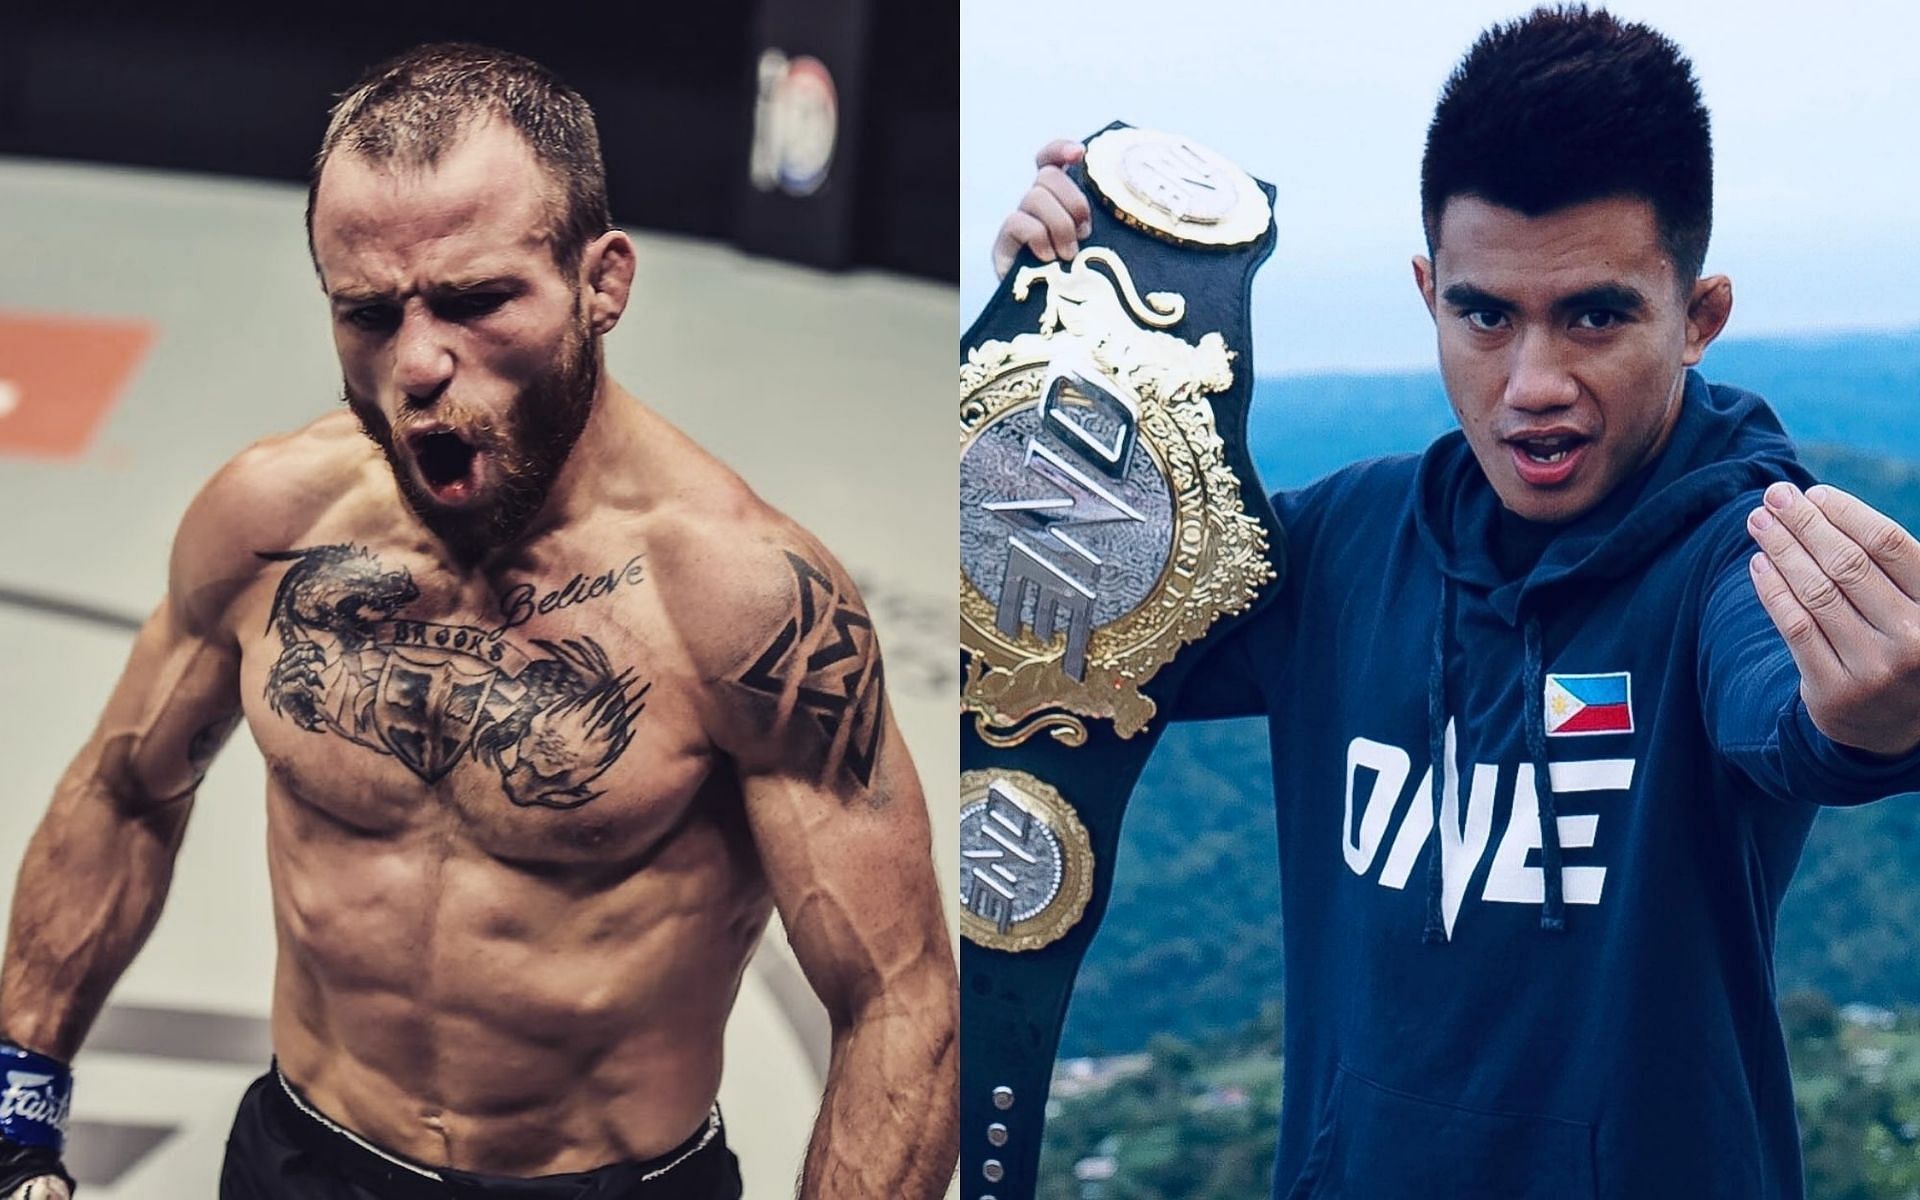 ONE Championship&#039;s Jarred Brooks wants Joshua Pacio&#039;s strawweight title after Only The Brave win. [Photos: @the_monkeygod, @joshuapacio on Instagram]